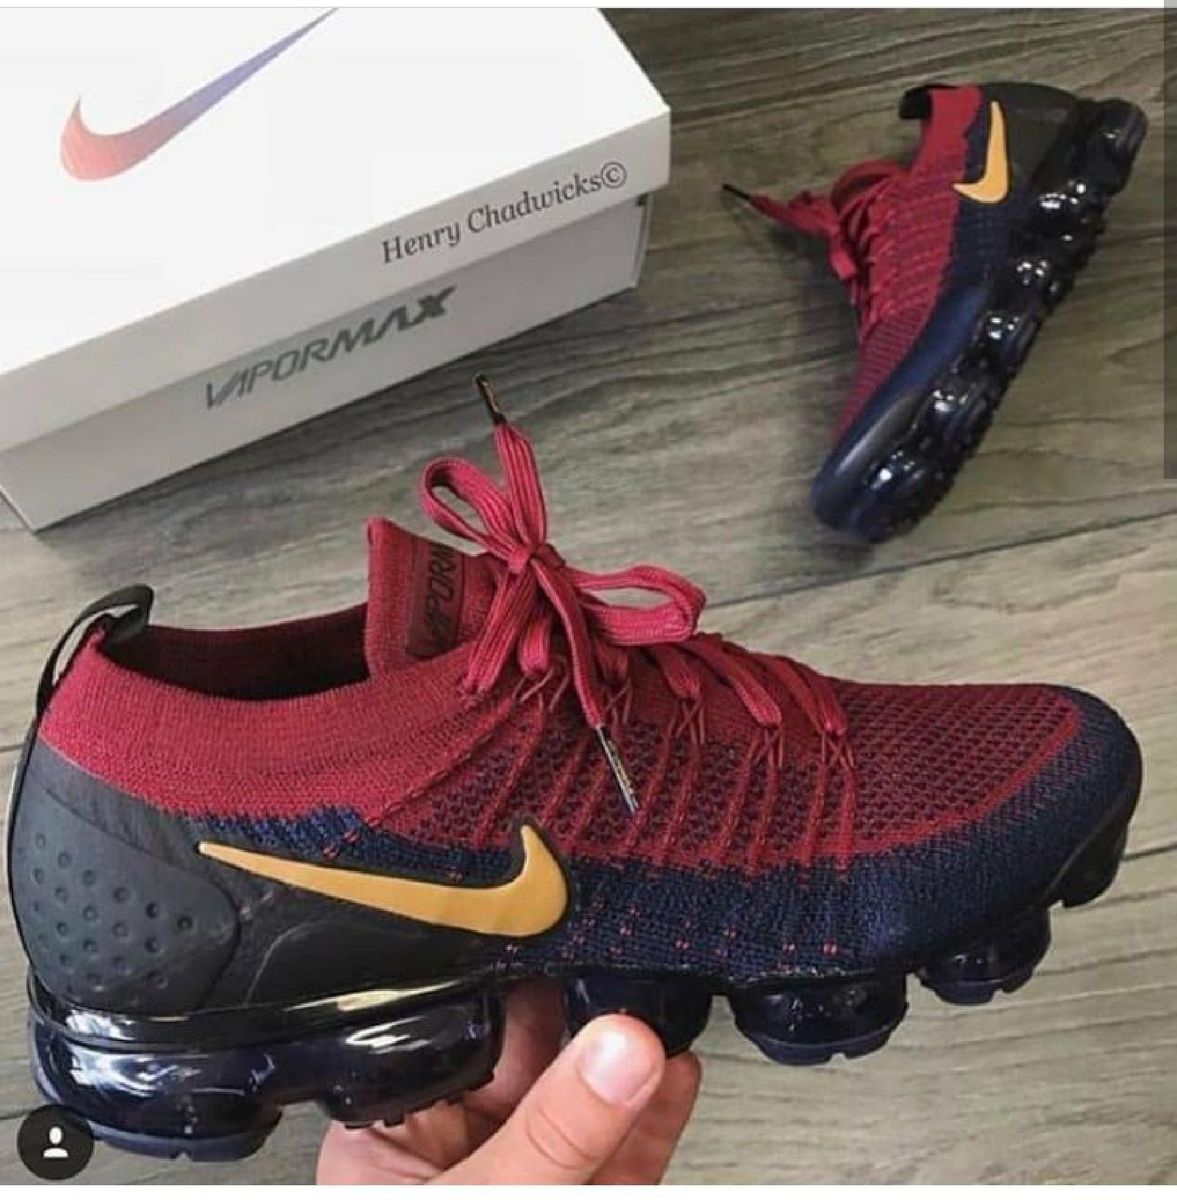 henry chadwicks vapormax black and red